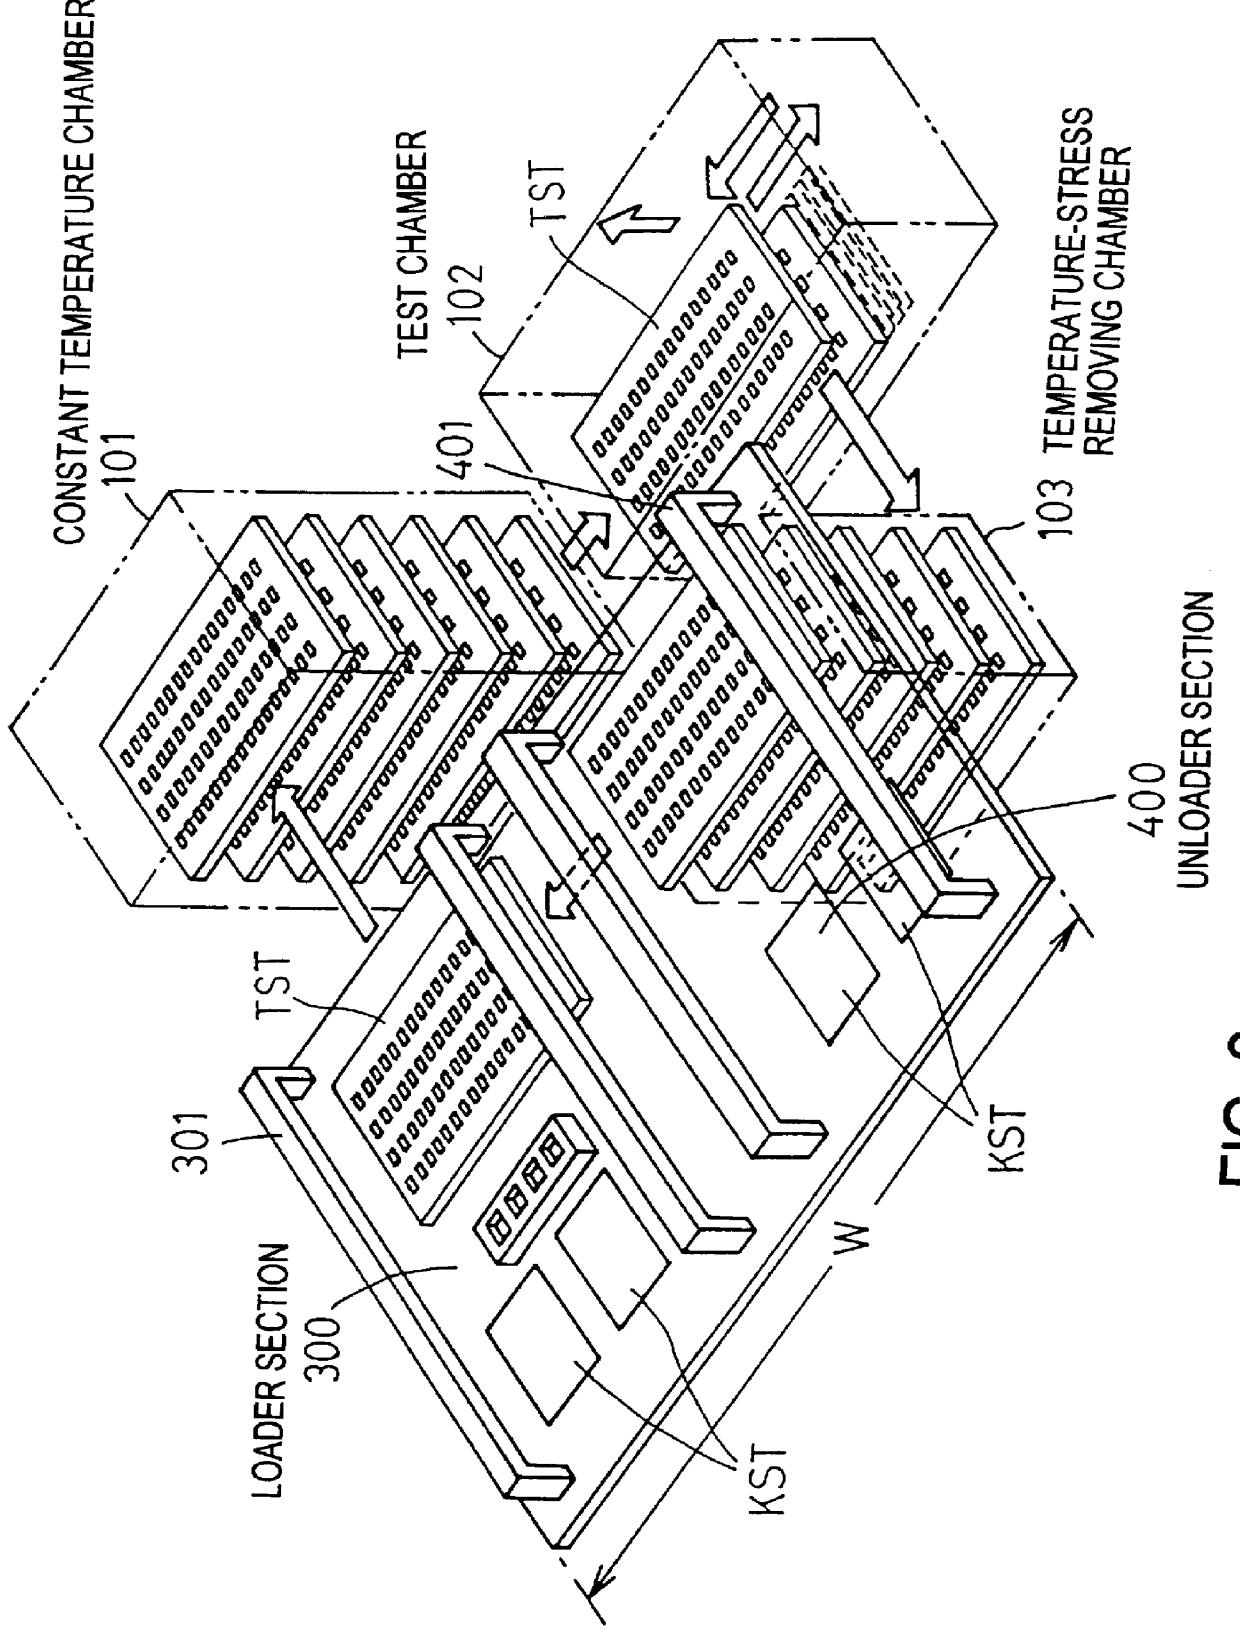 Semiconductor device testing apparatus